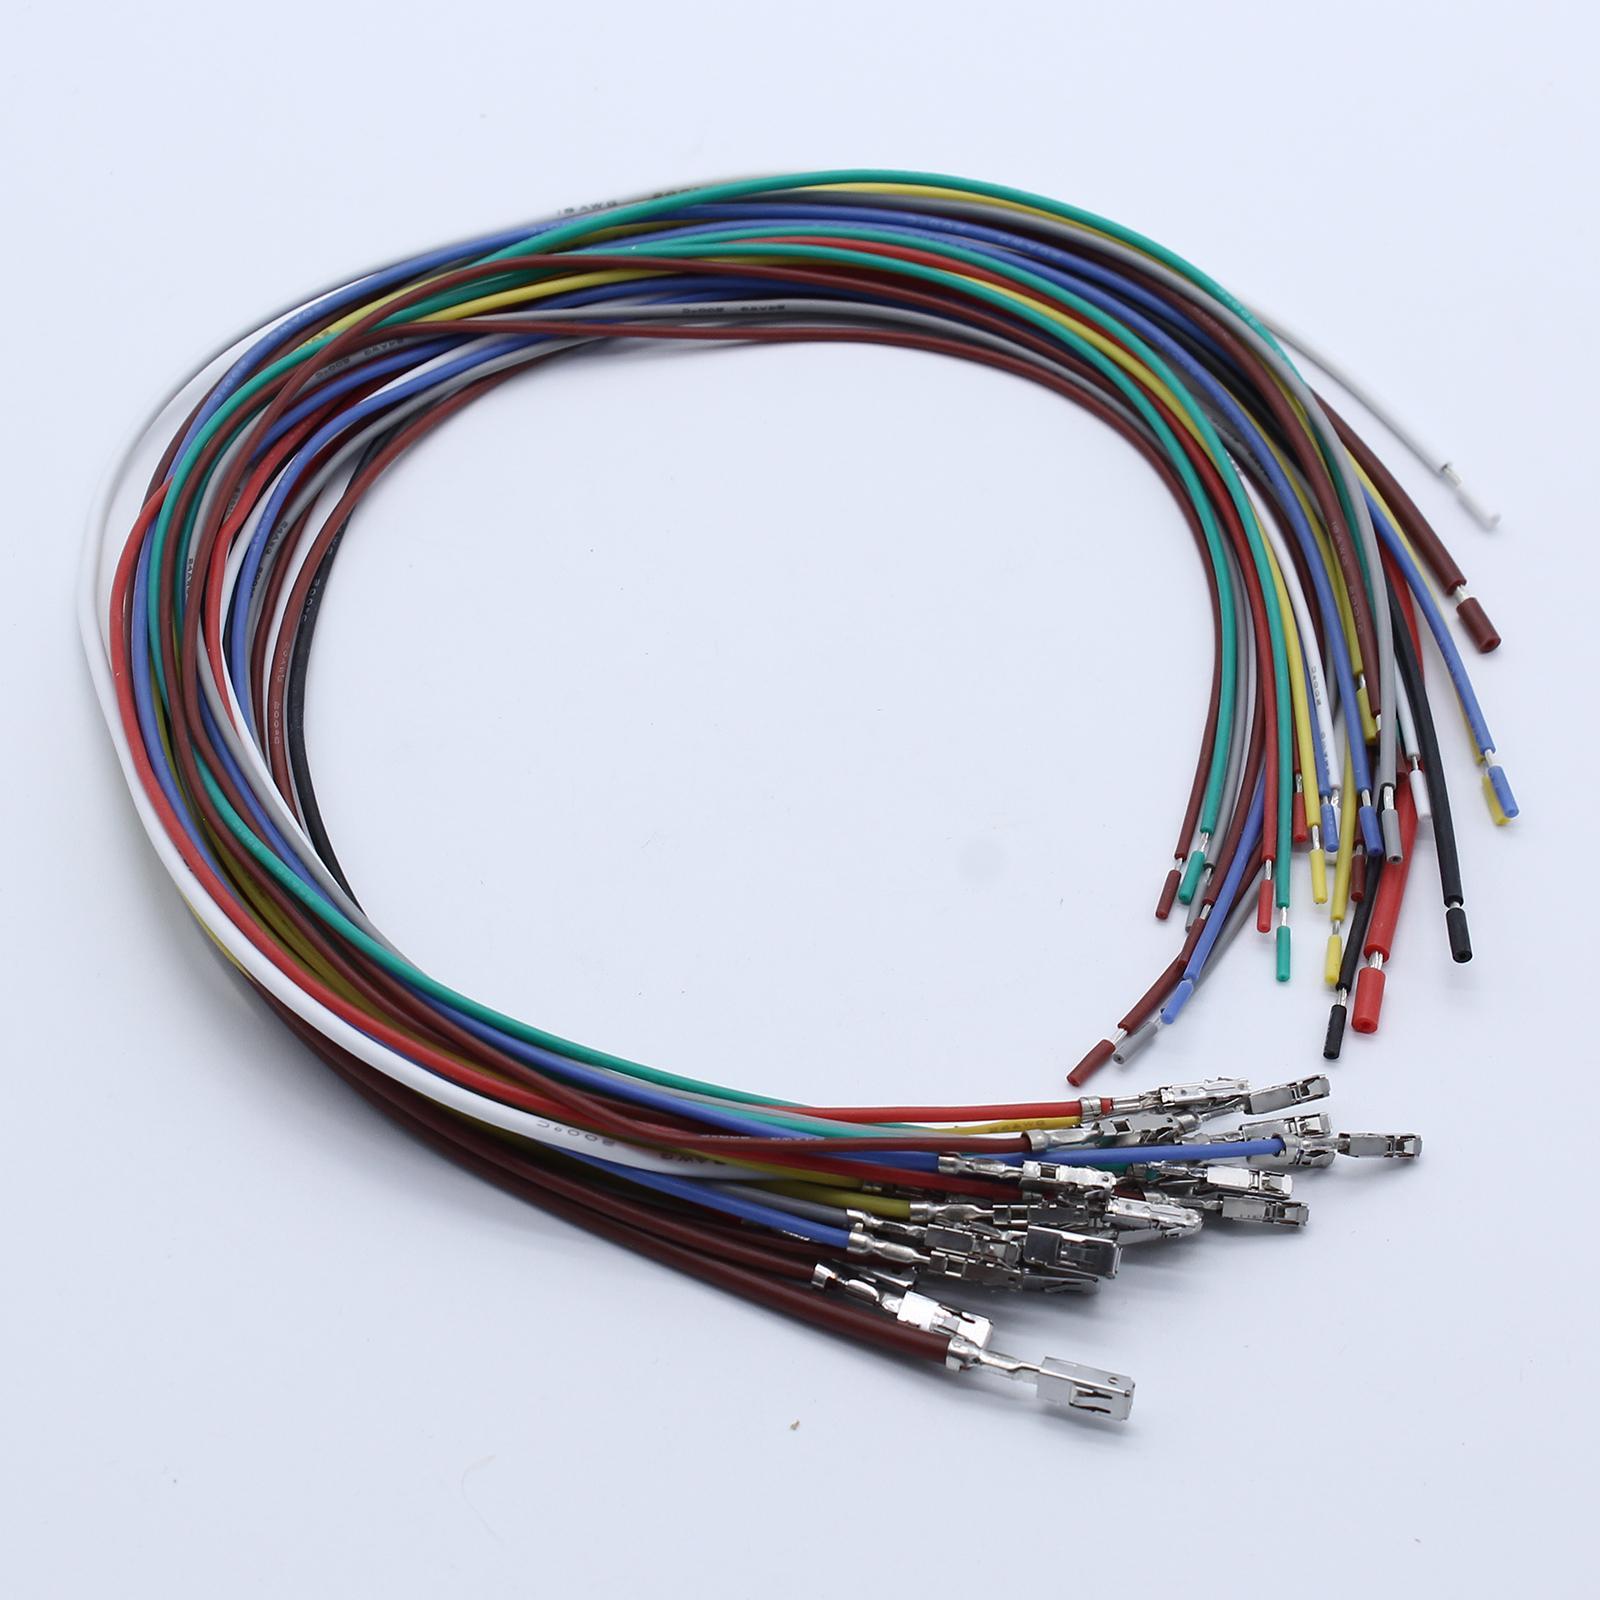 Replacement Front Rear Door Wiring Harness Cable Kits Plug Set for